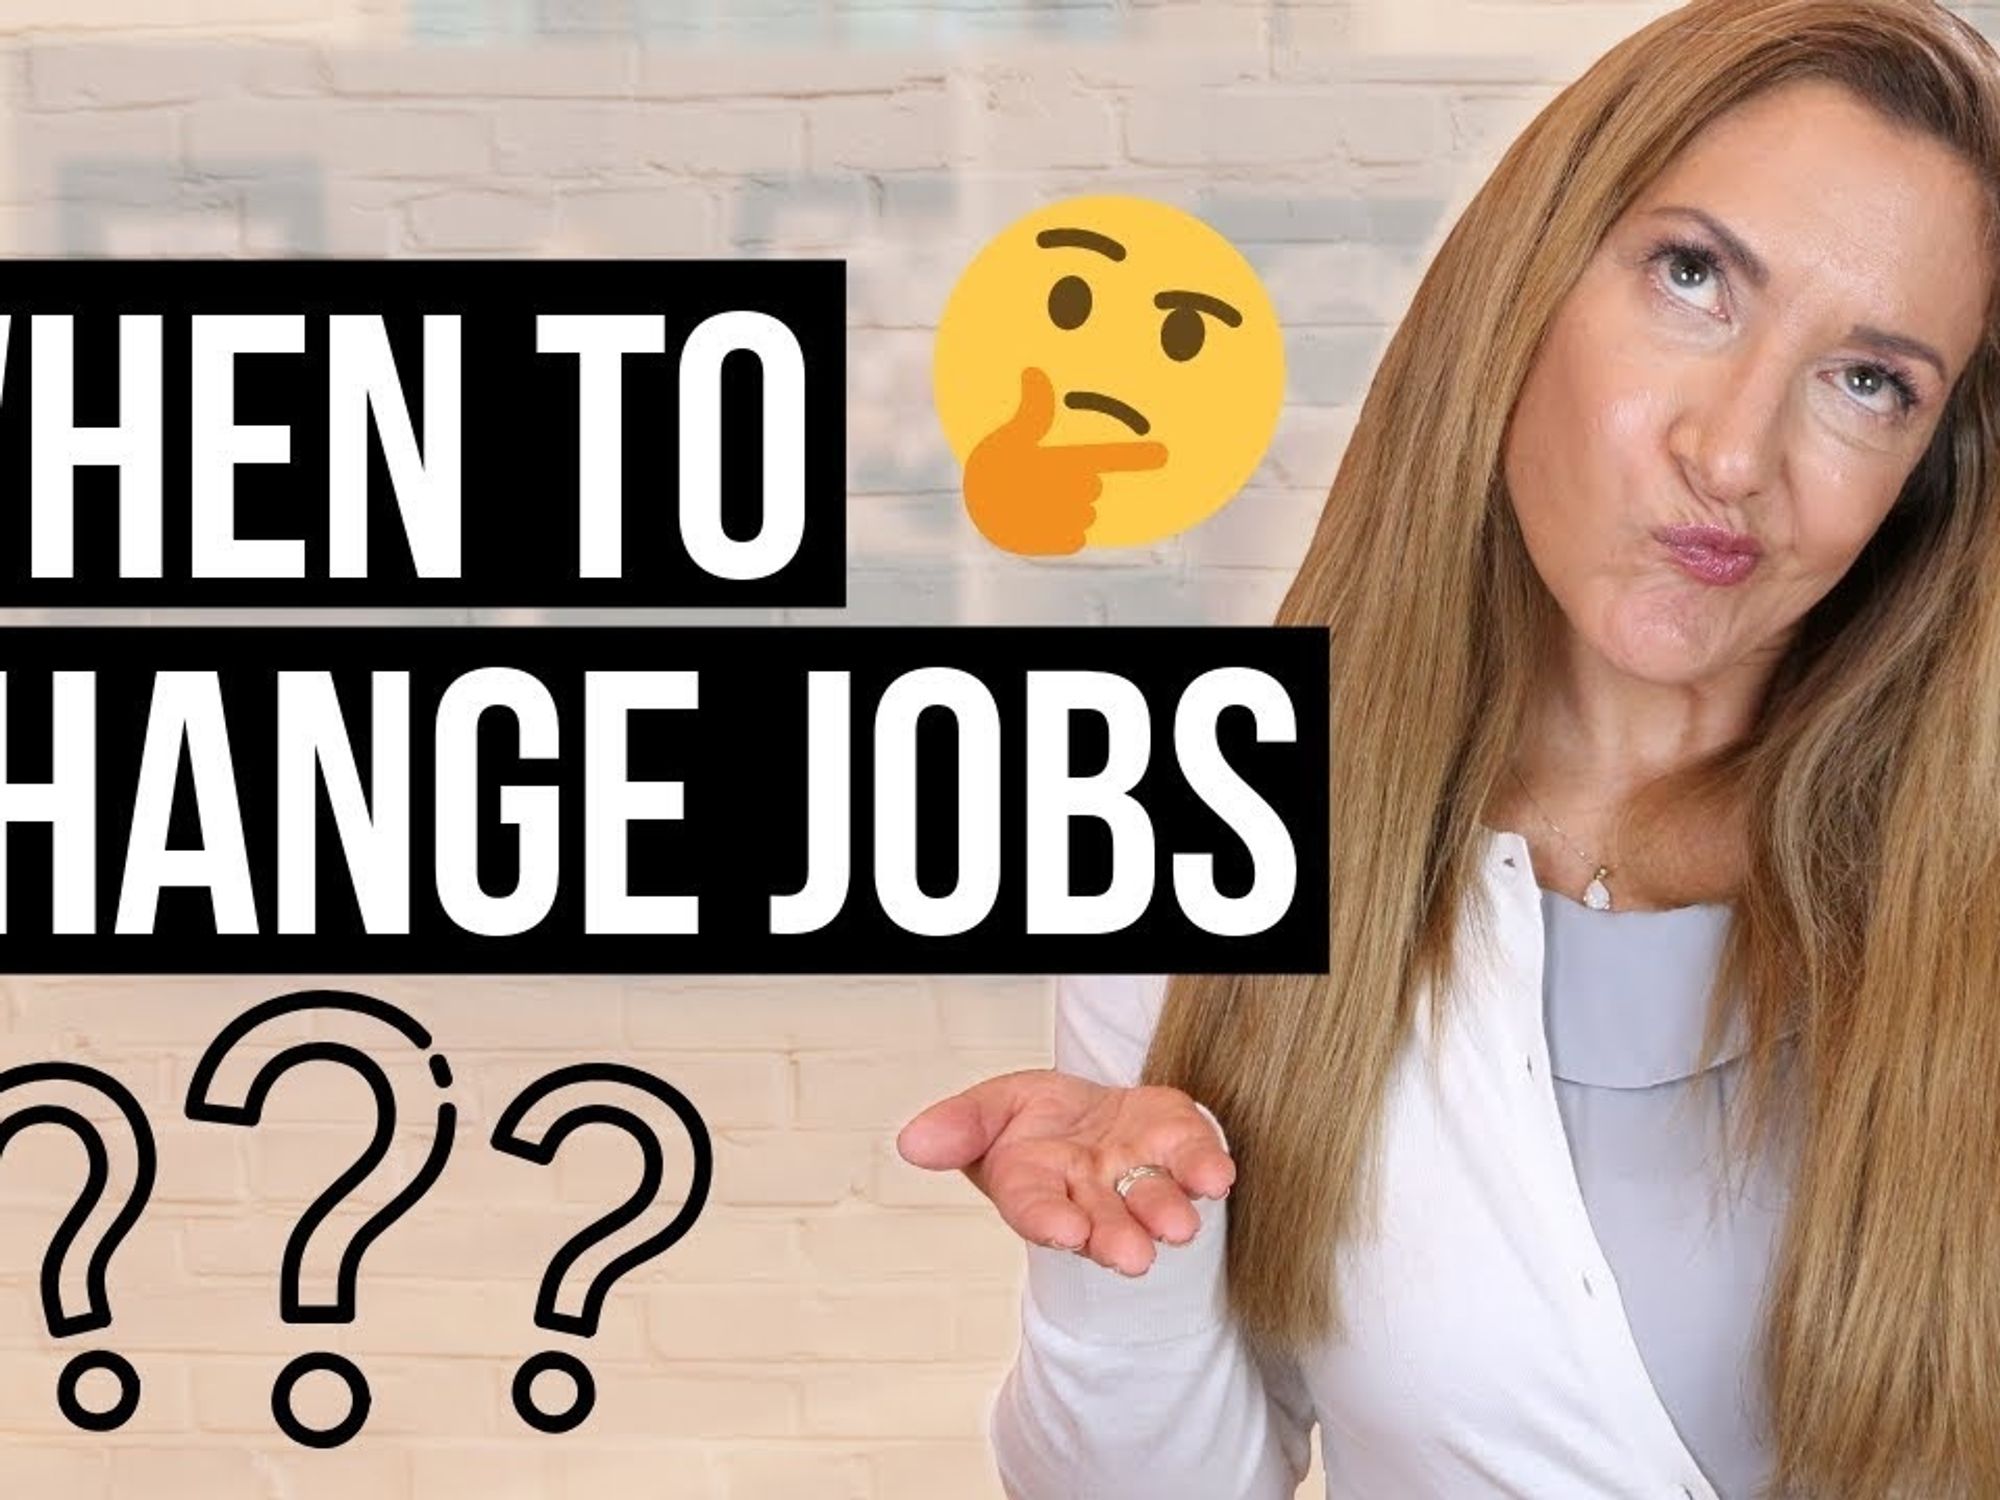 Do You Know When It's Time To Change Jobs?